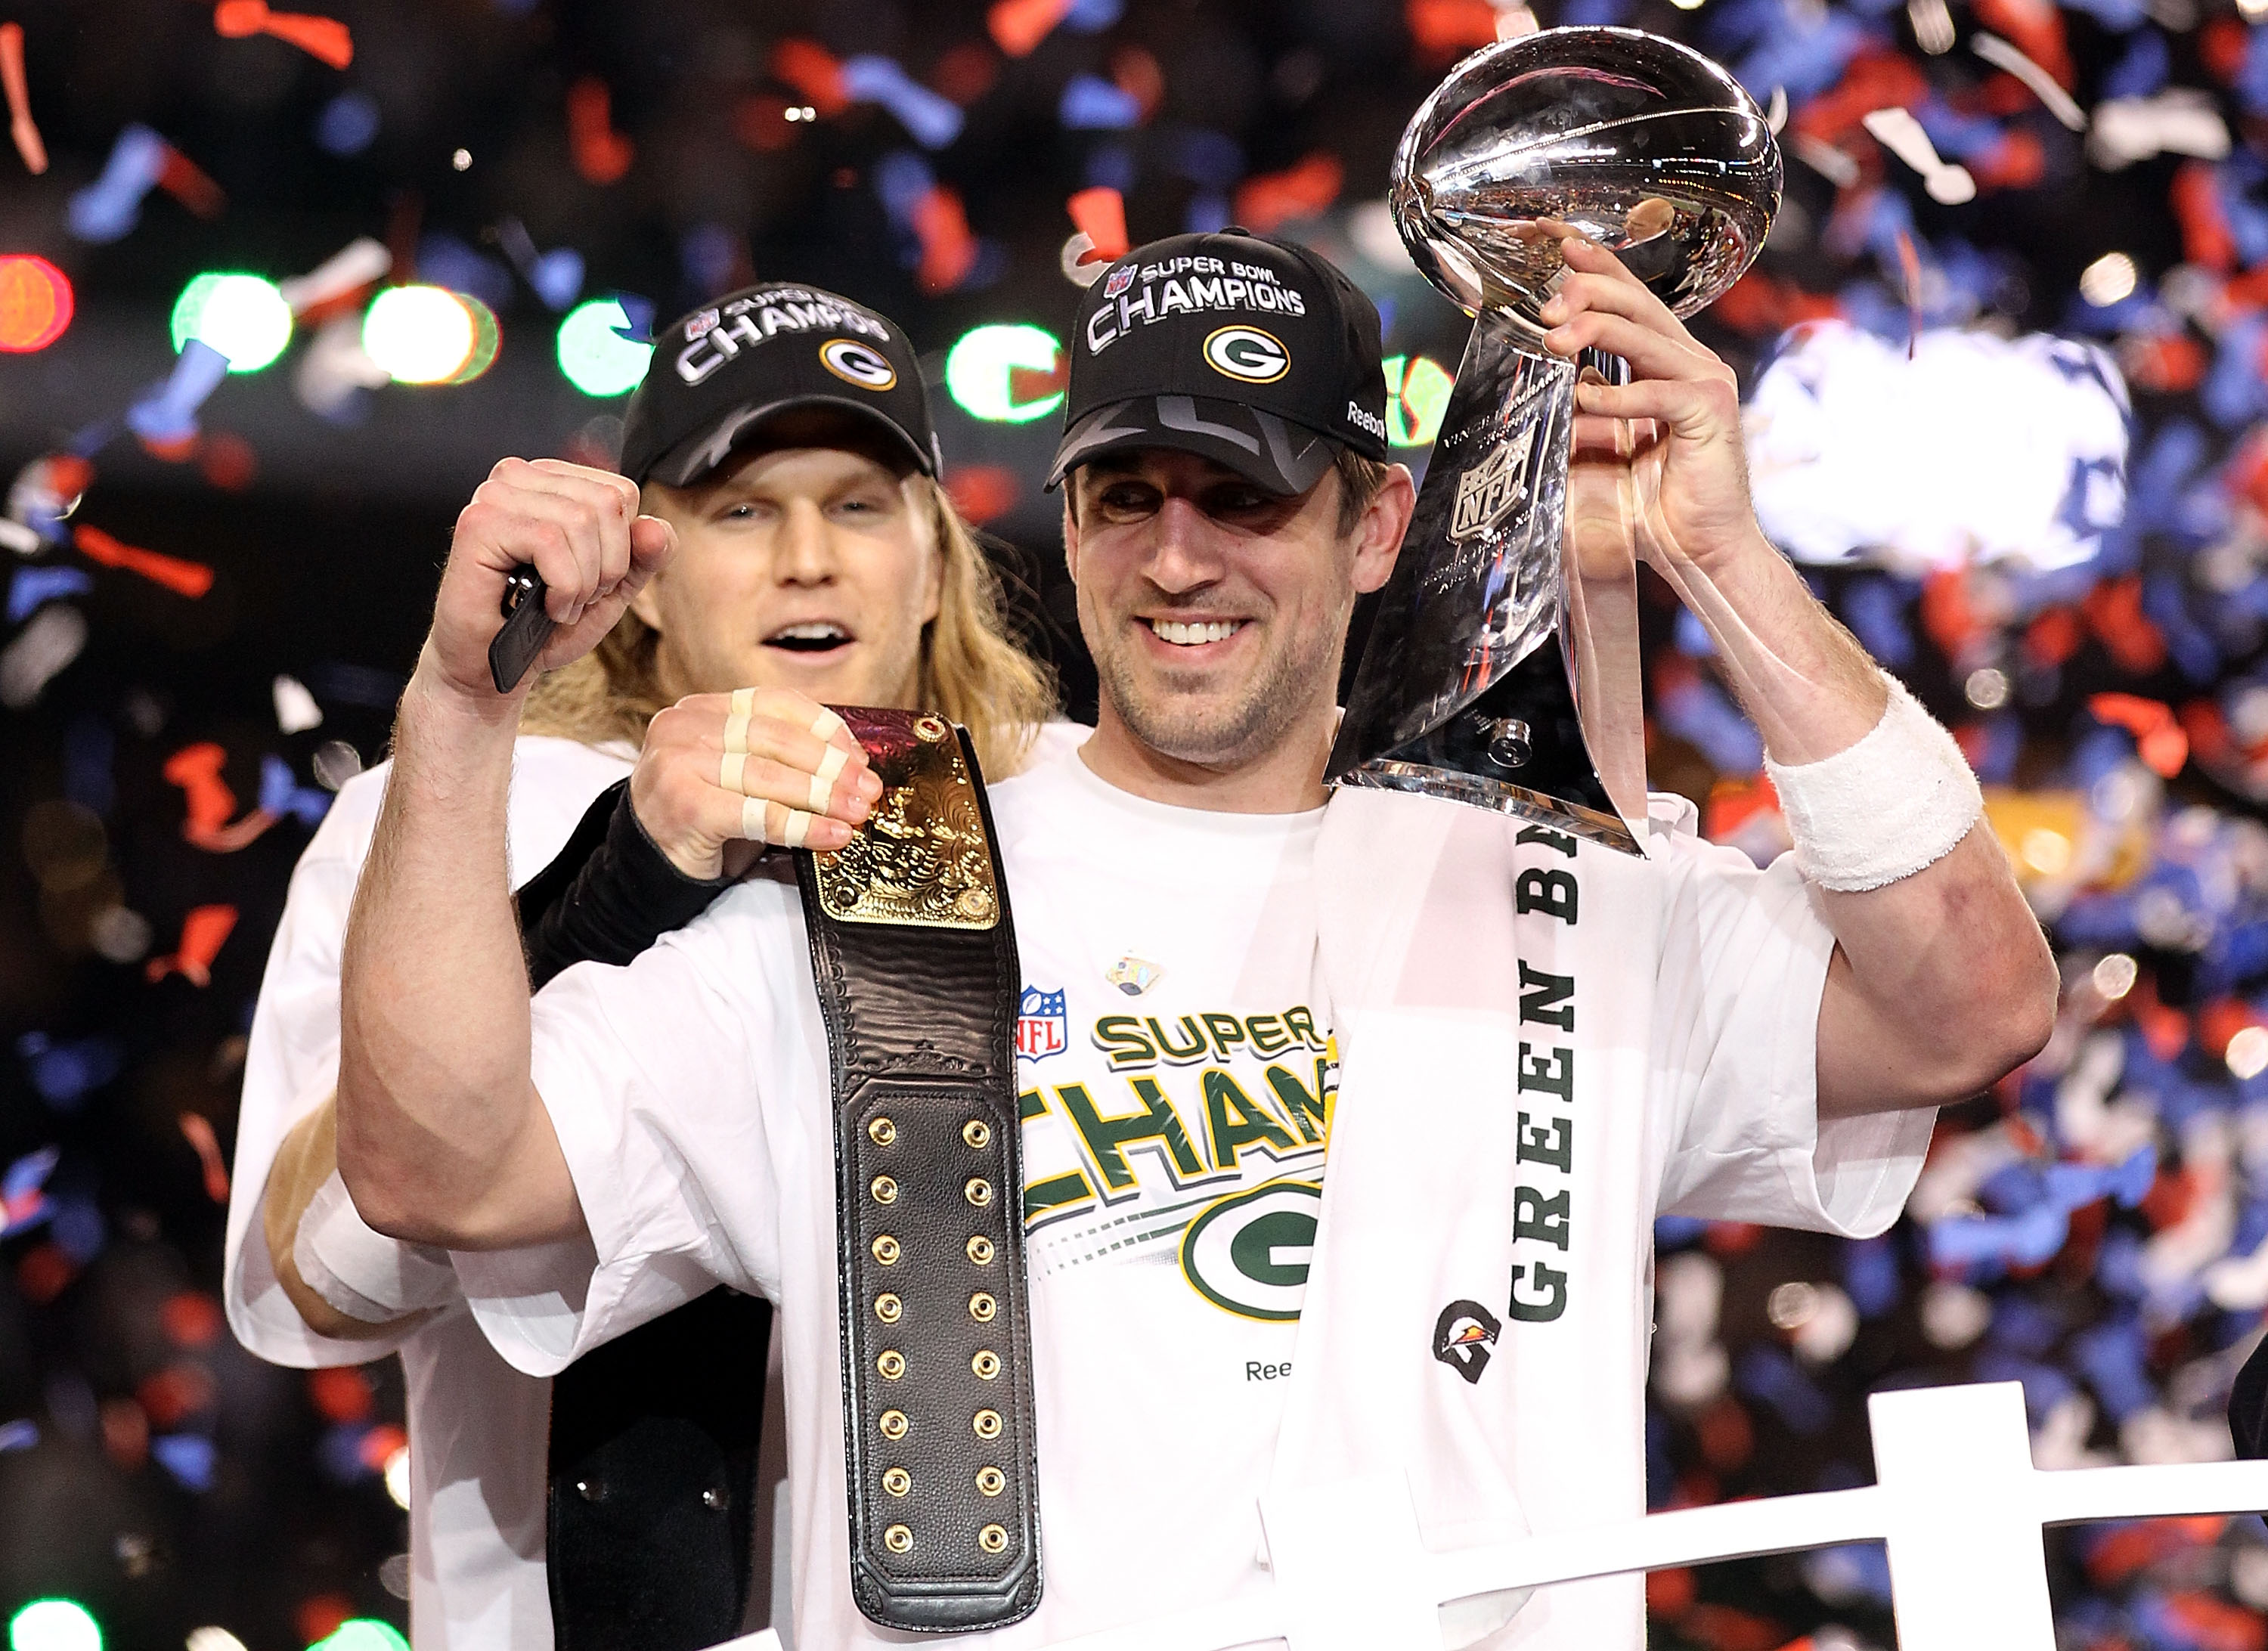 green bay packers championships and super bowls